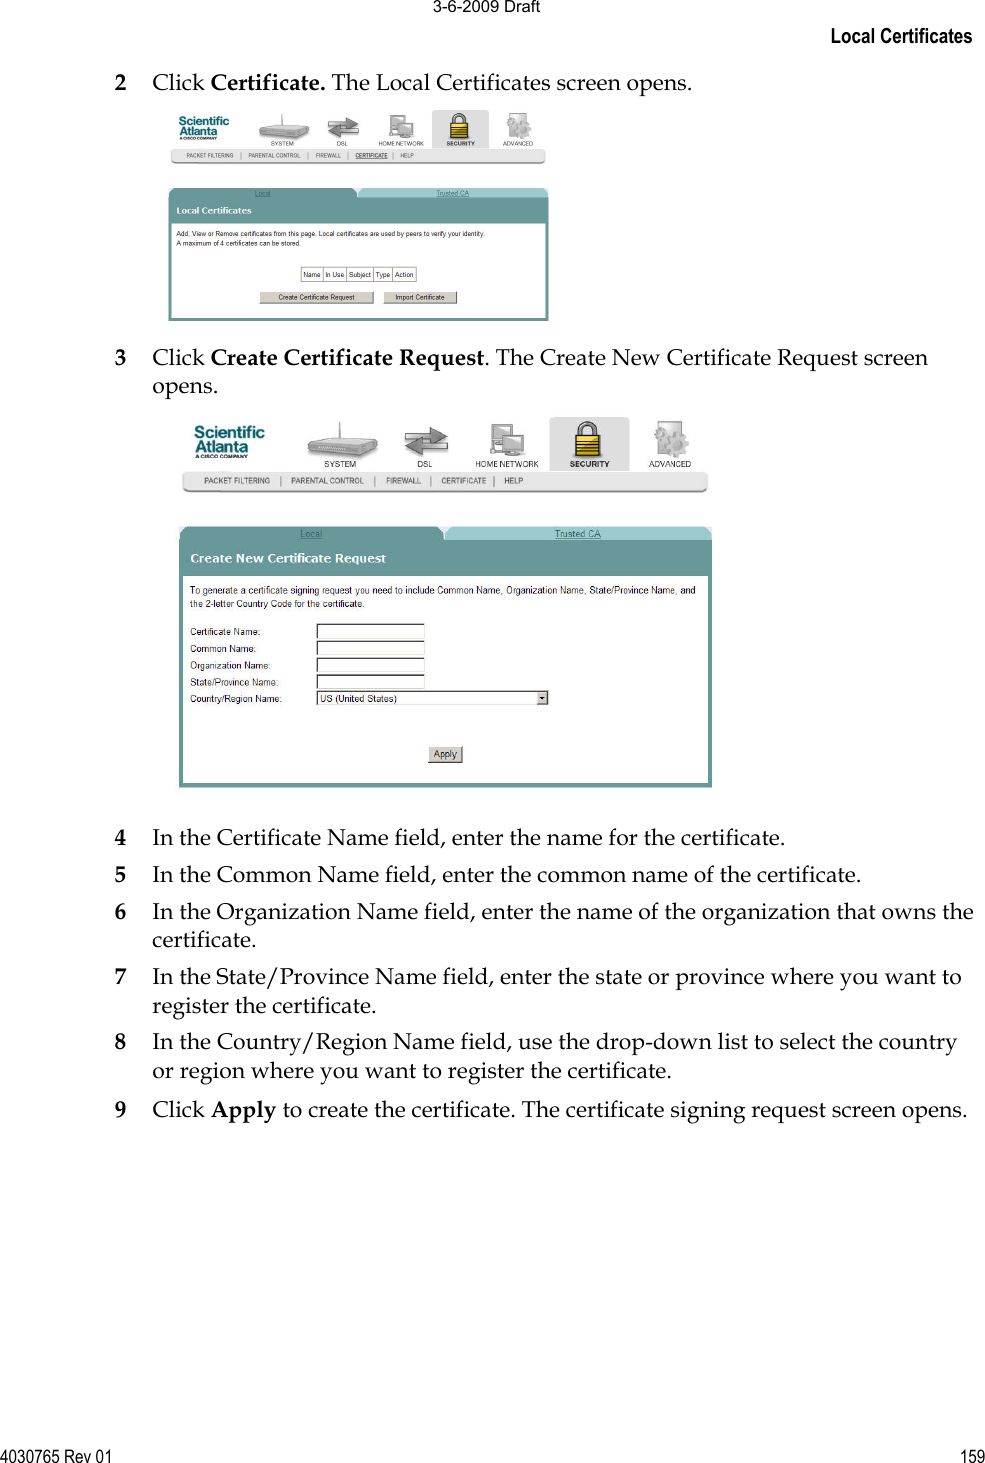 Local Certificates 4030765 Rev 01 1592Click Certificate. The Local Certificates screen opens. 3Click Create Certificate Request. The Create New Certificate Request screen opens. 4In the Certificate Name field, enter the name for the certificate.  5In the Common Name field, enter the common name of the certificate.  6In the Organization Name field, enter the name of the organization that owns thecertificate. 7In the State/Province Name field, enter the state or province where you want to register the certificate. 8In the Country/Region Name field, use the drop-down list to select the country or region where you want to register the certificate.  9Click Apply to create the certificate. The certificate signing request screen opens.  3-6-2009 Draft